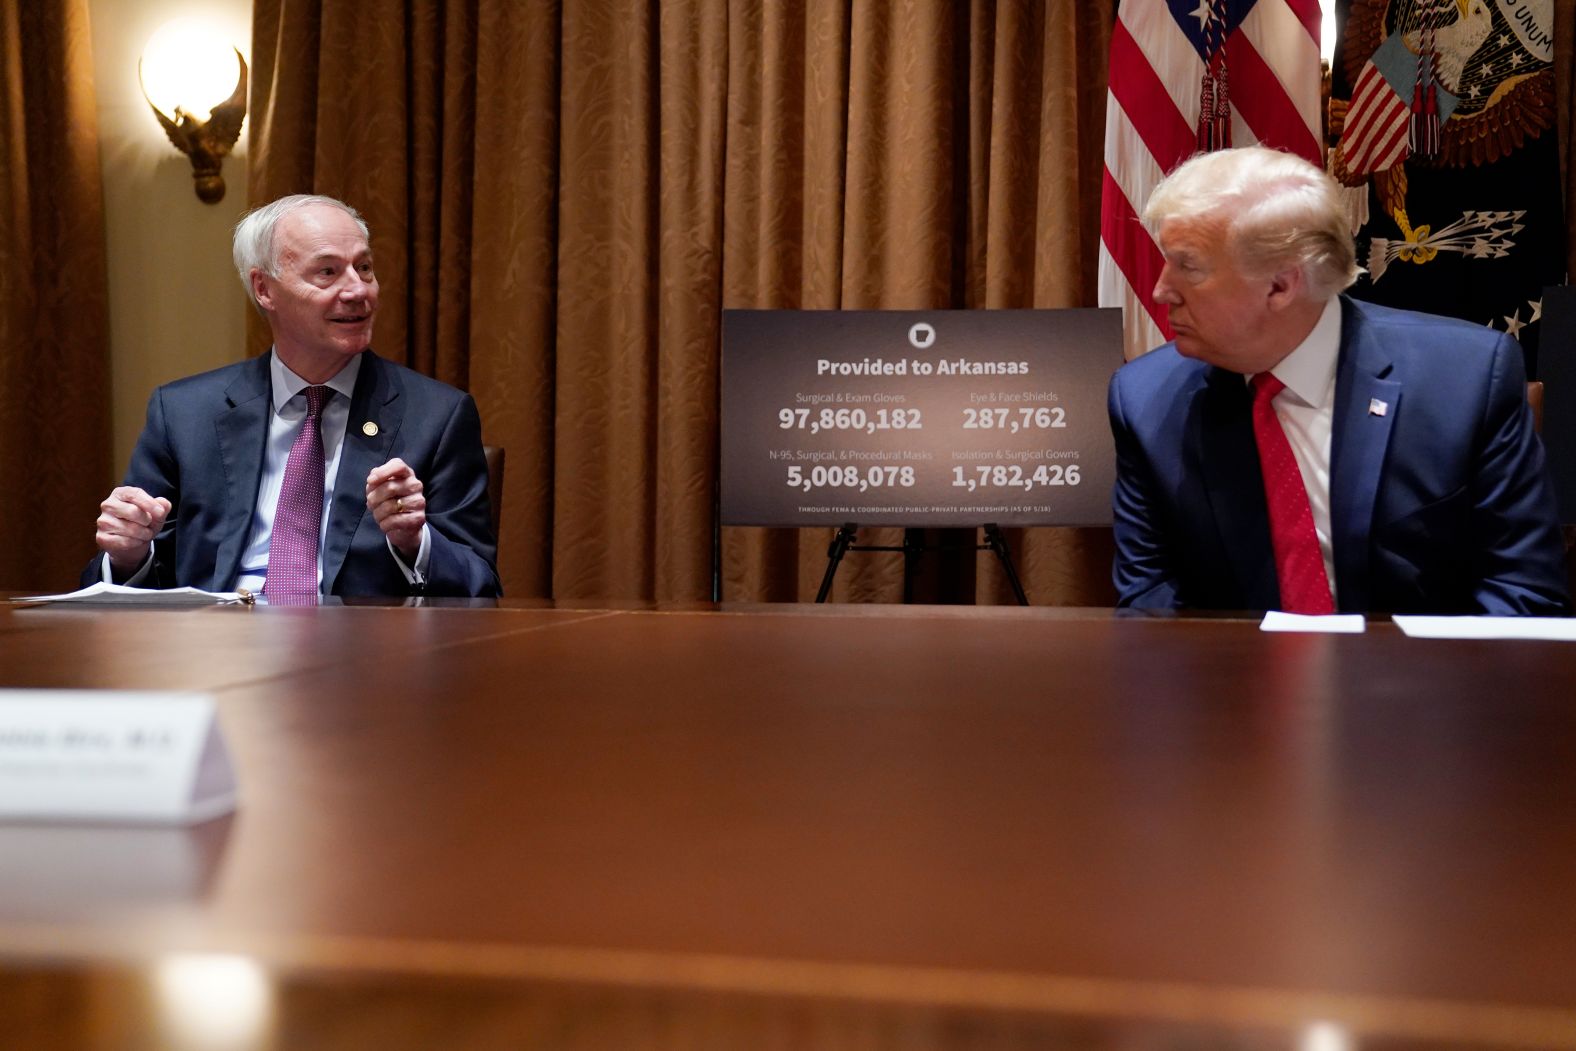 President Donald Trump meets with Hutchinson at the White House in 2020.